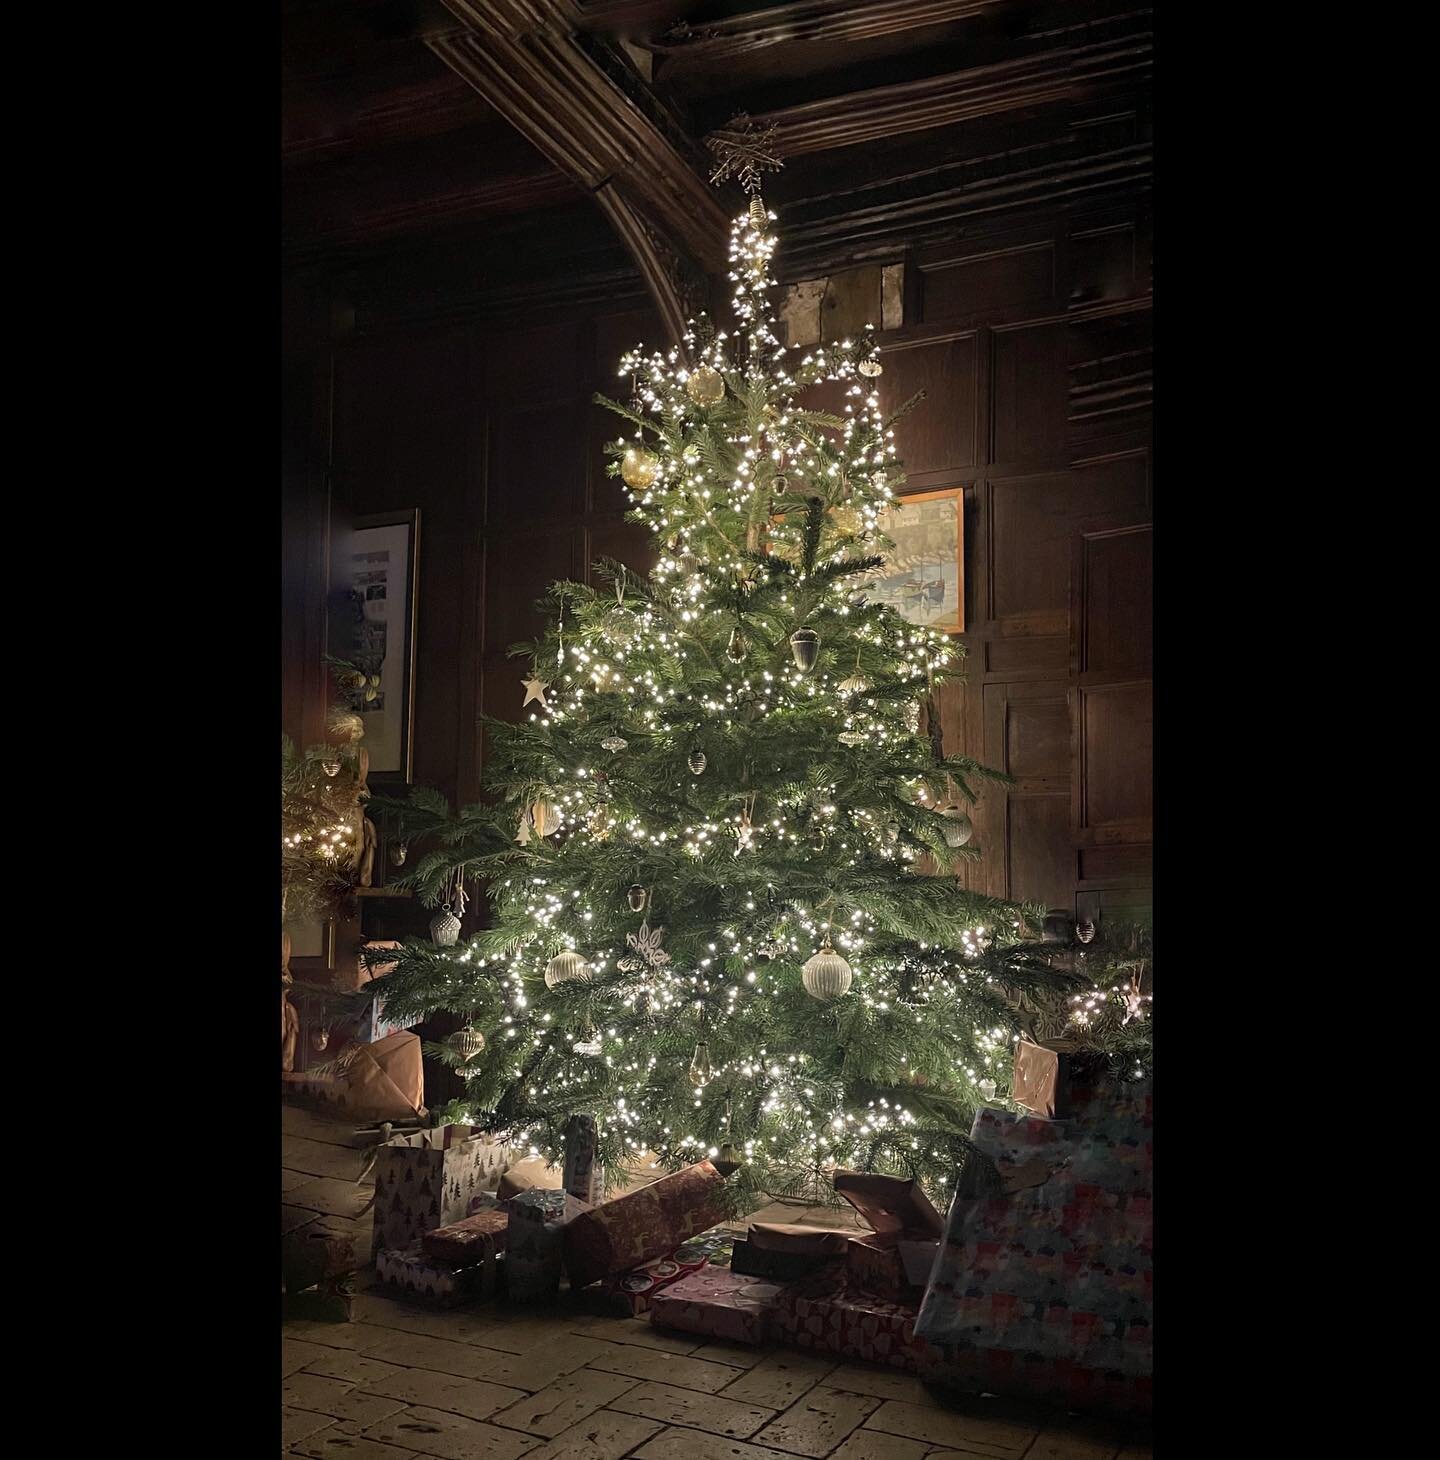 We are delighted to announce that we will be doing two very special Evening Christmas House Guided Tours on Saturday 3rd and 10th December finishing with Mince Pies and Mulled wine next to the Christmas Tree in the Great Hall. You&rsquo;ll also get a